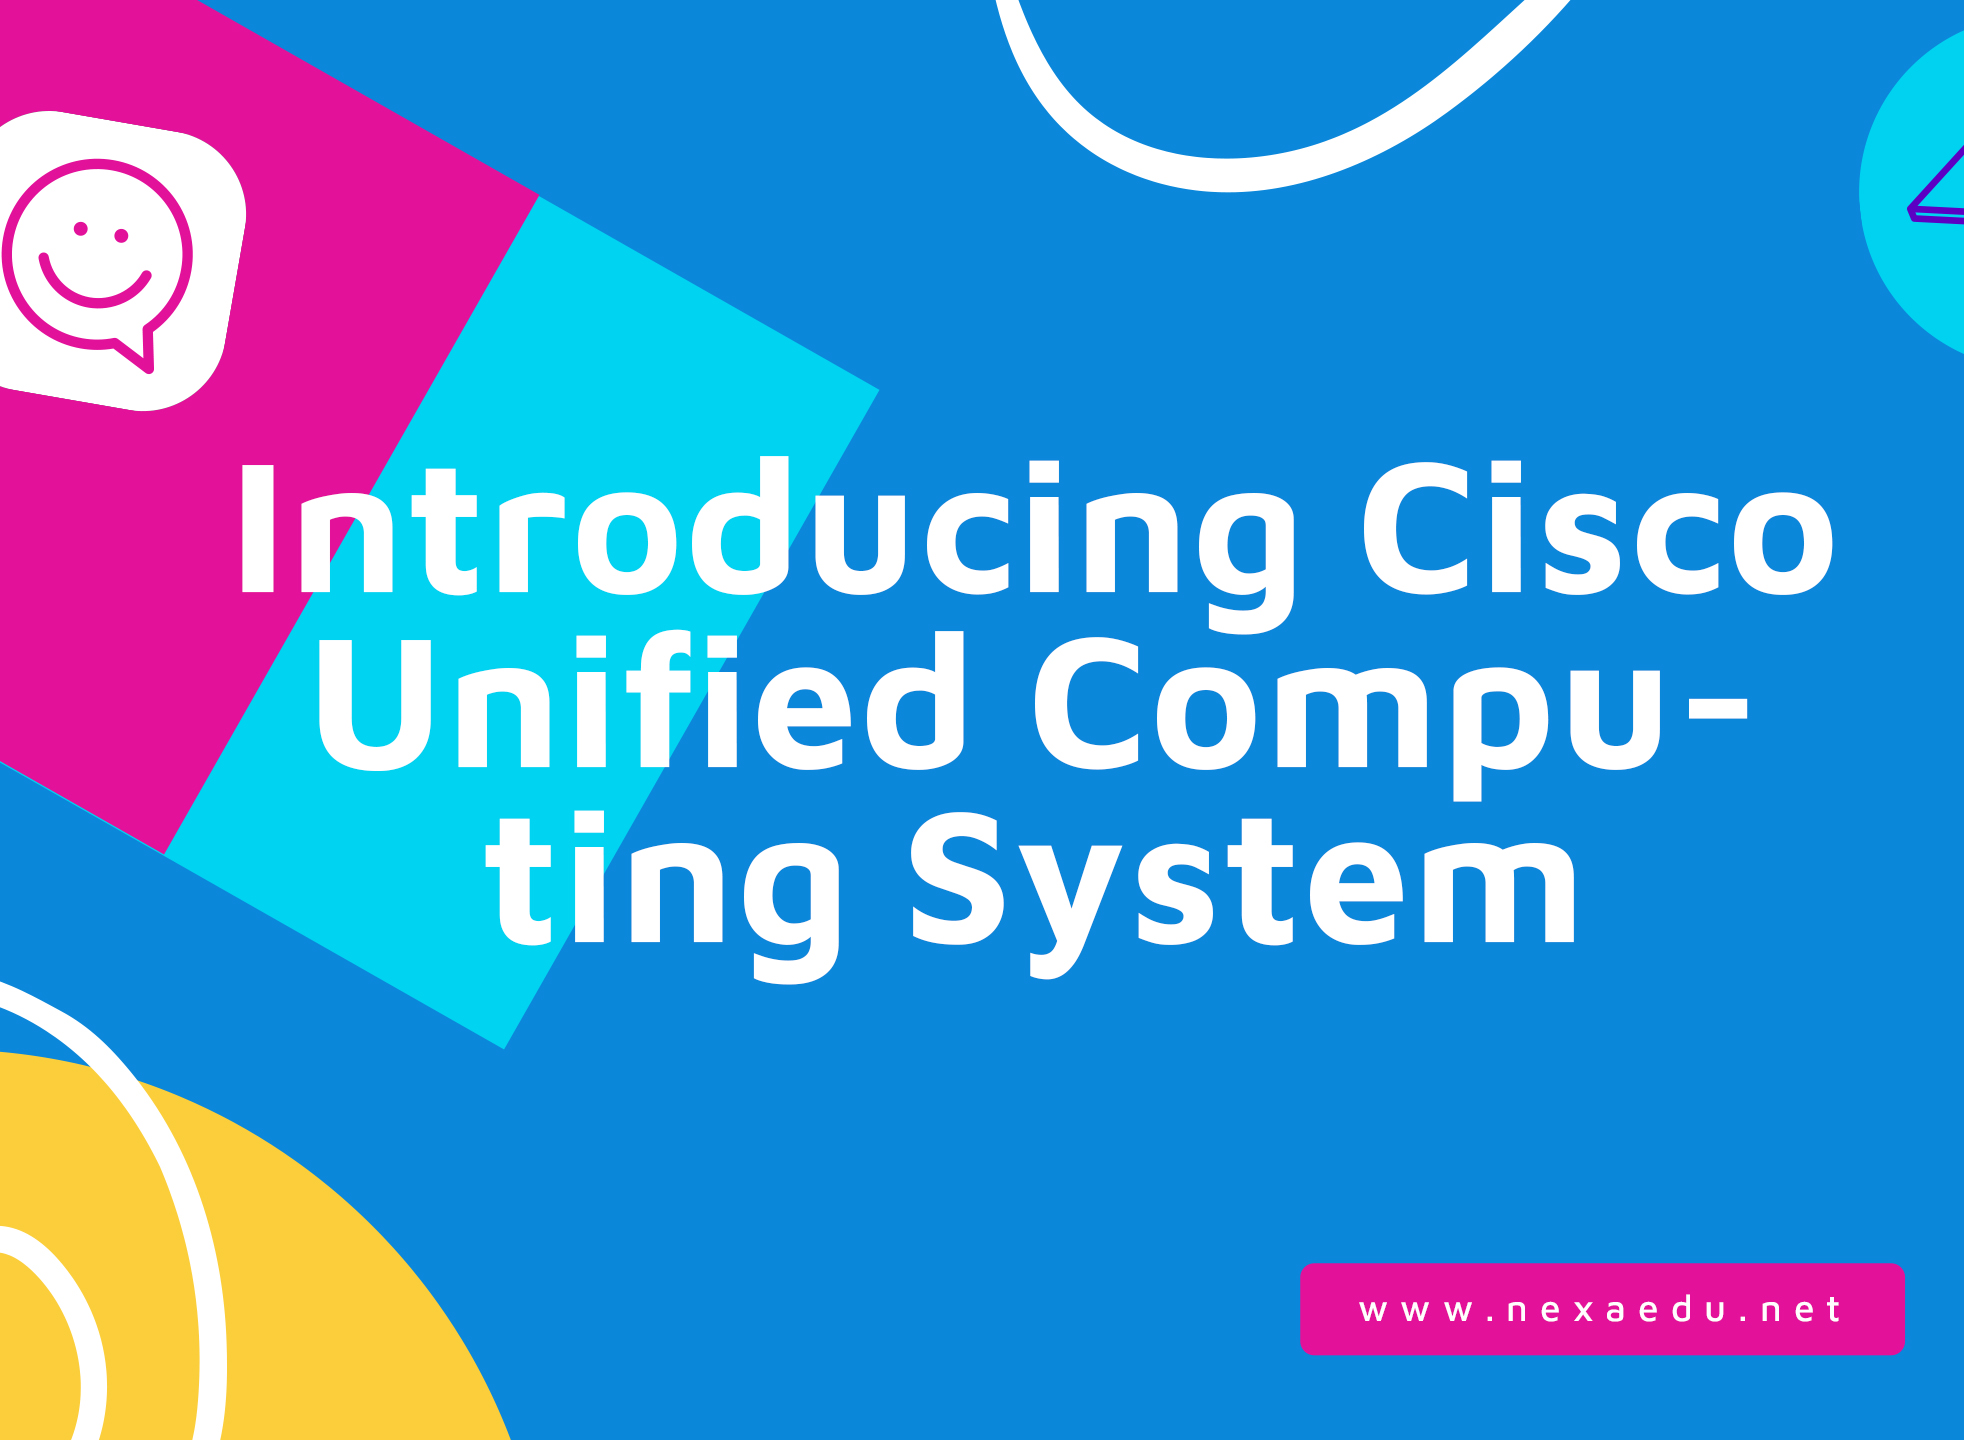 Introducing Cisco Unified Computing System